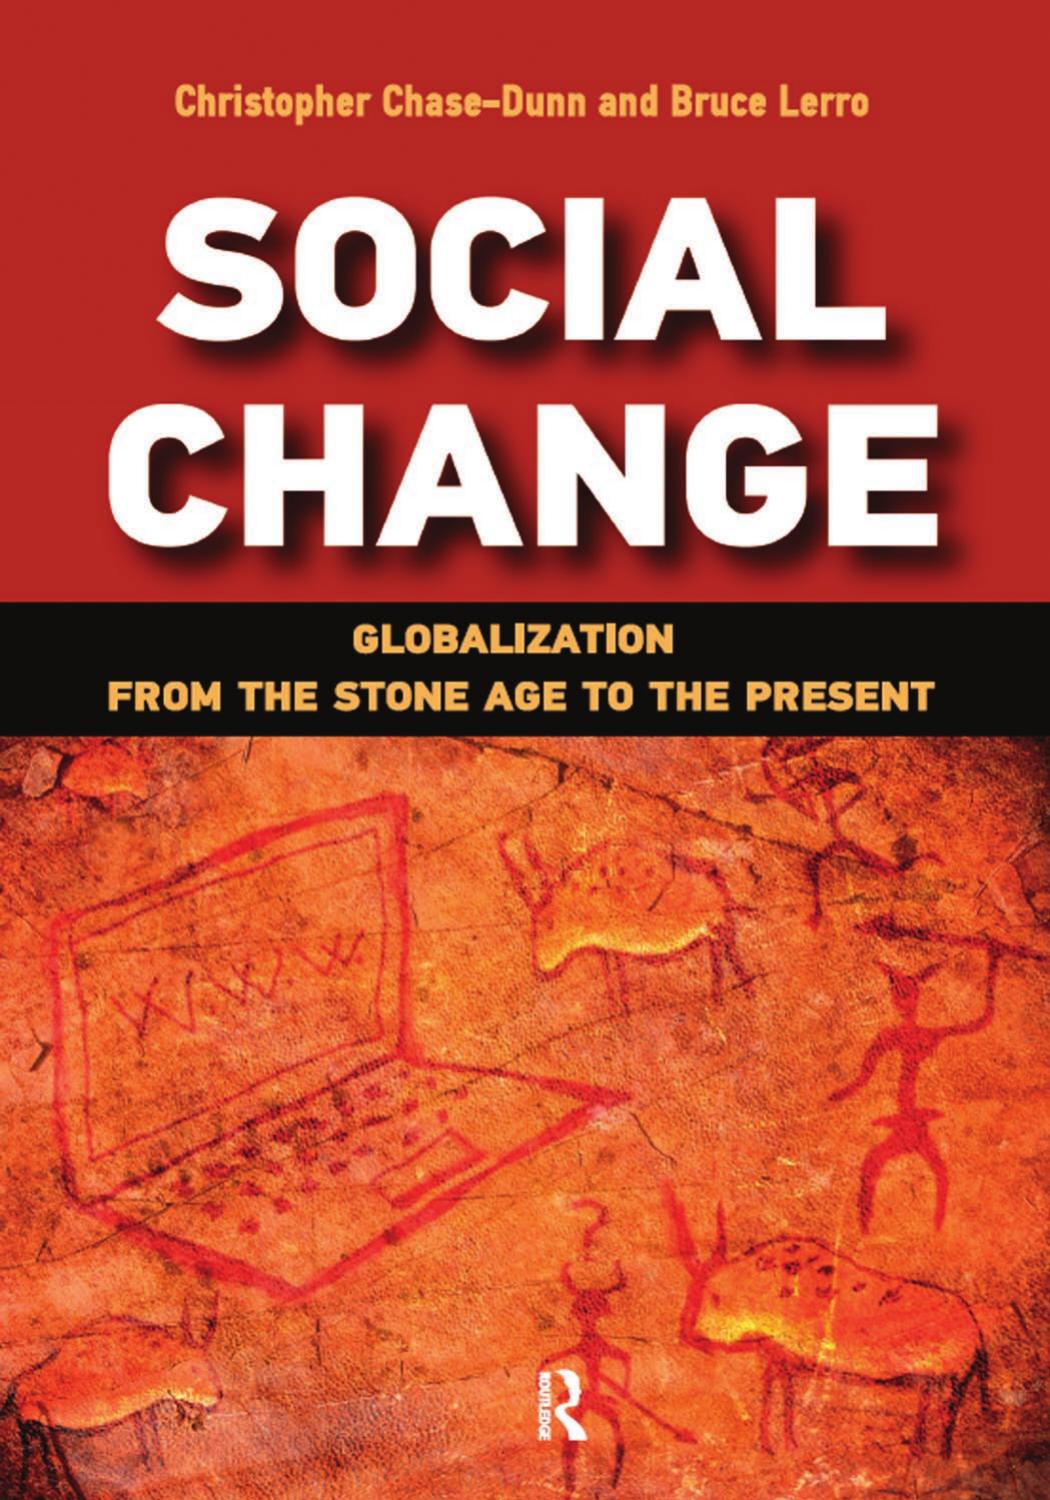 Social Change: Globalization From the Stone Age to the Present